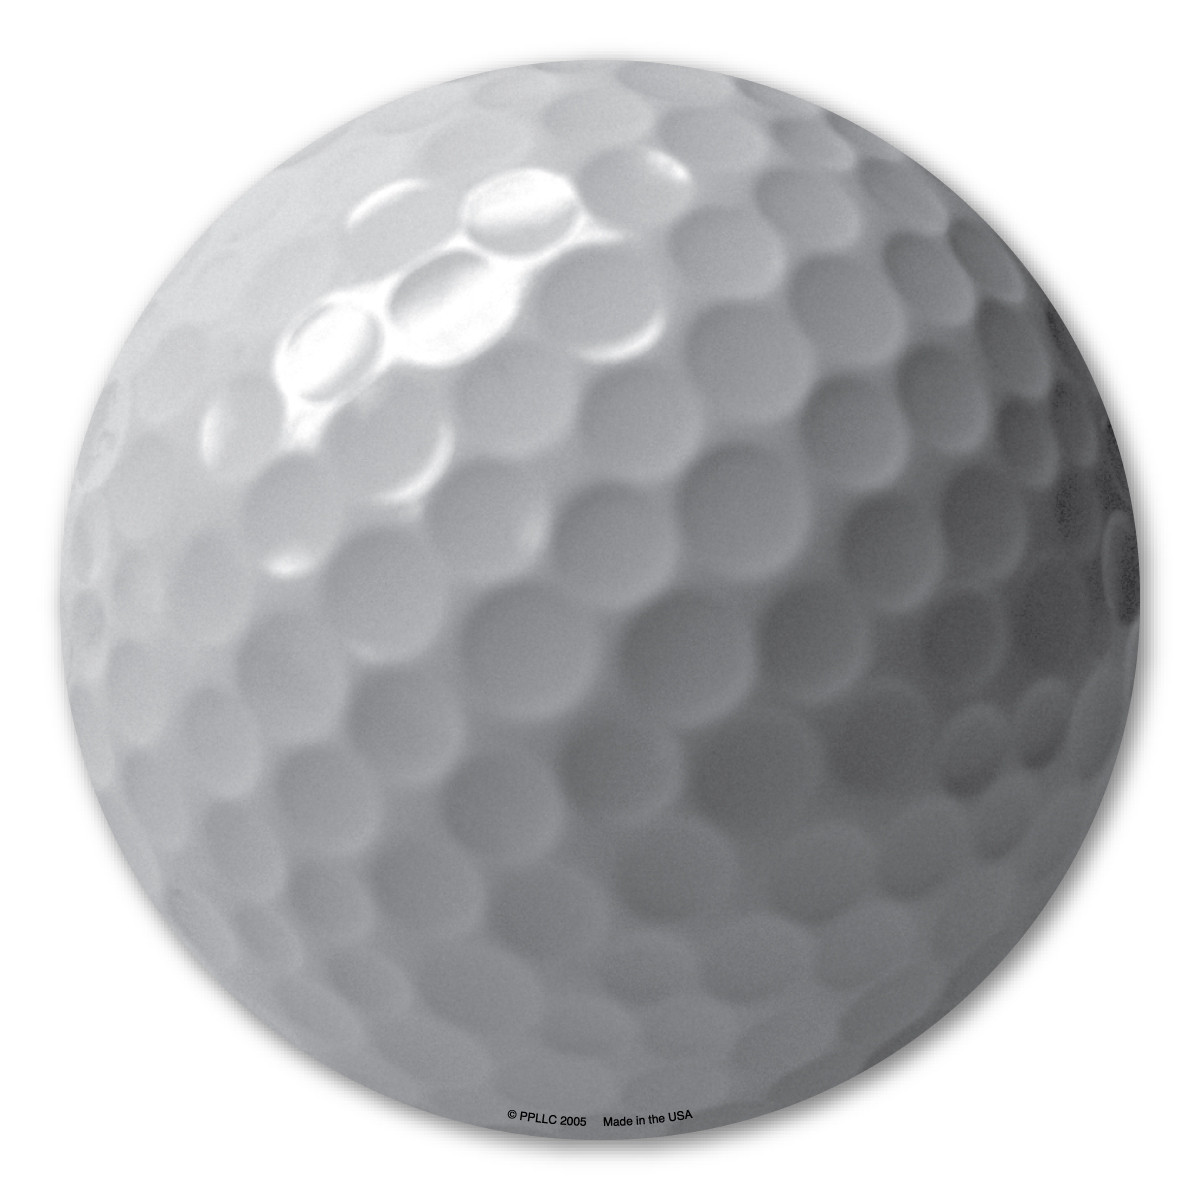 How Big Is A Golf Ball In Centimeters?
